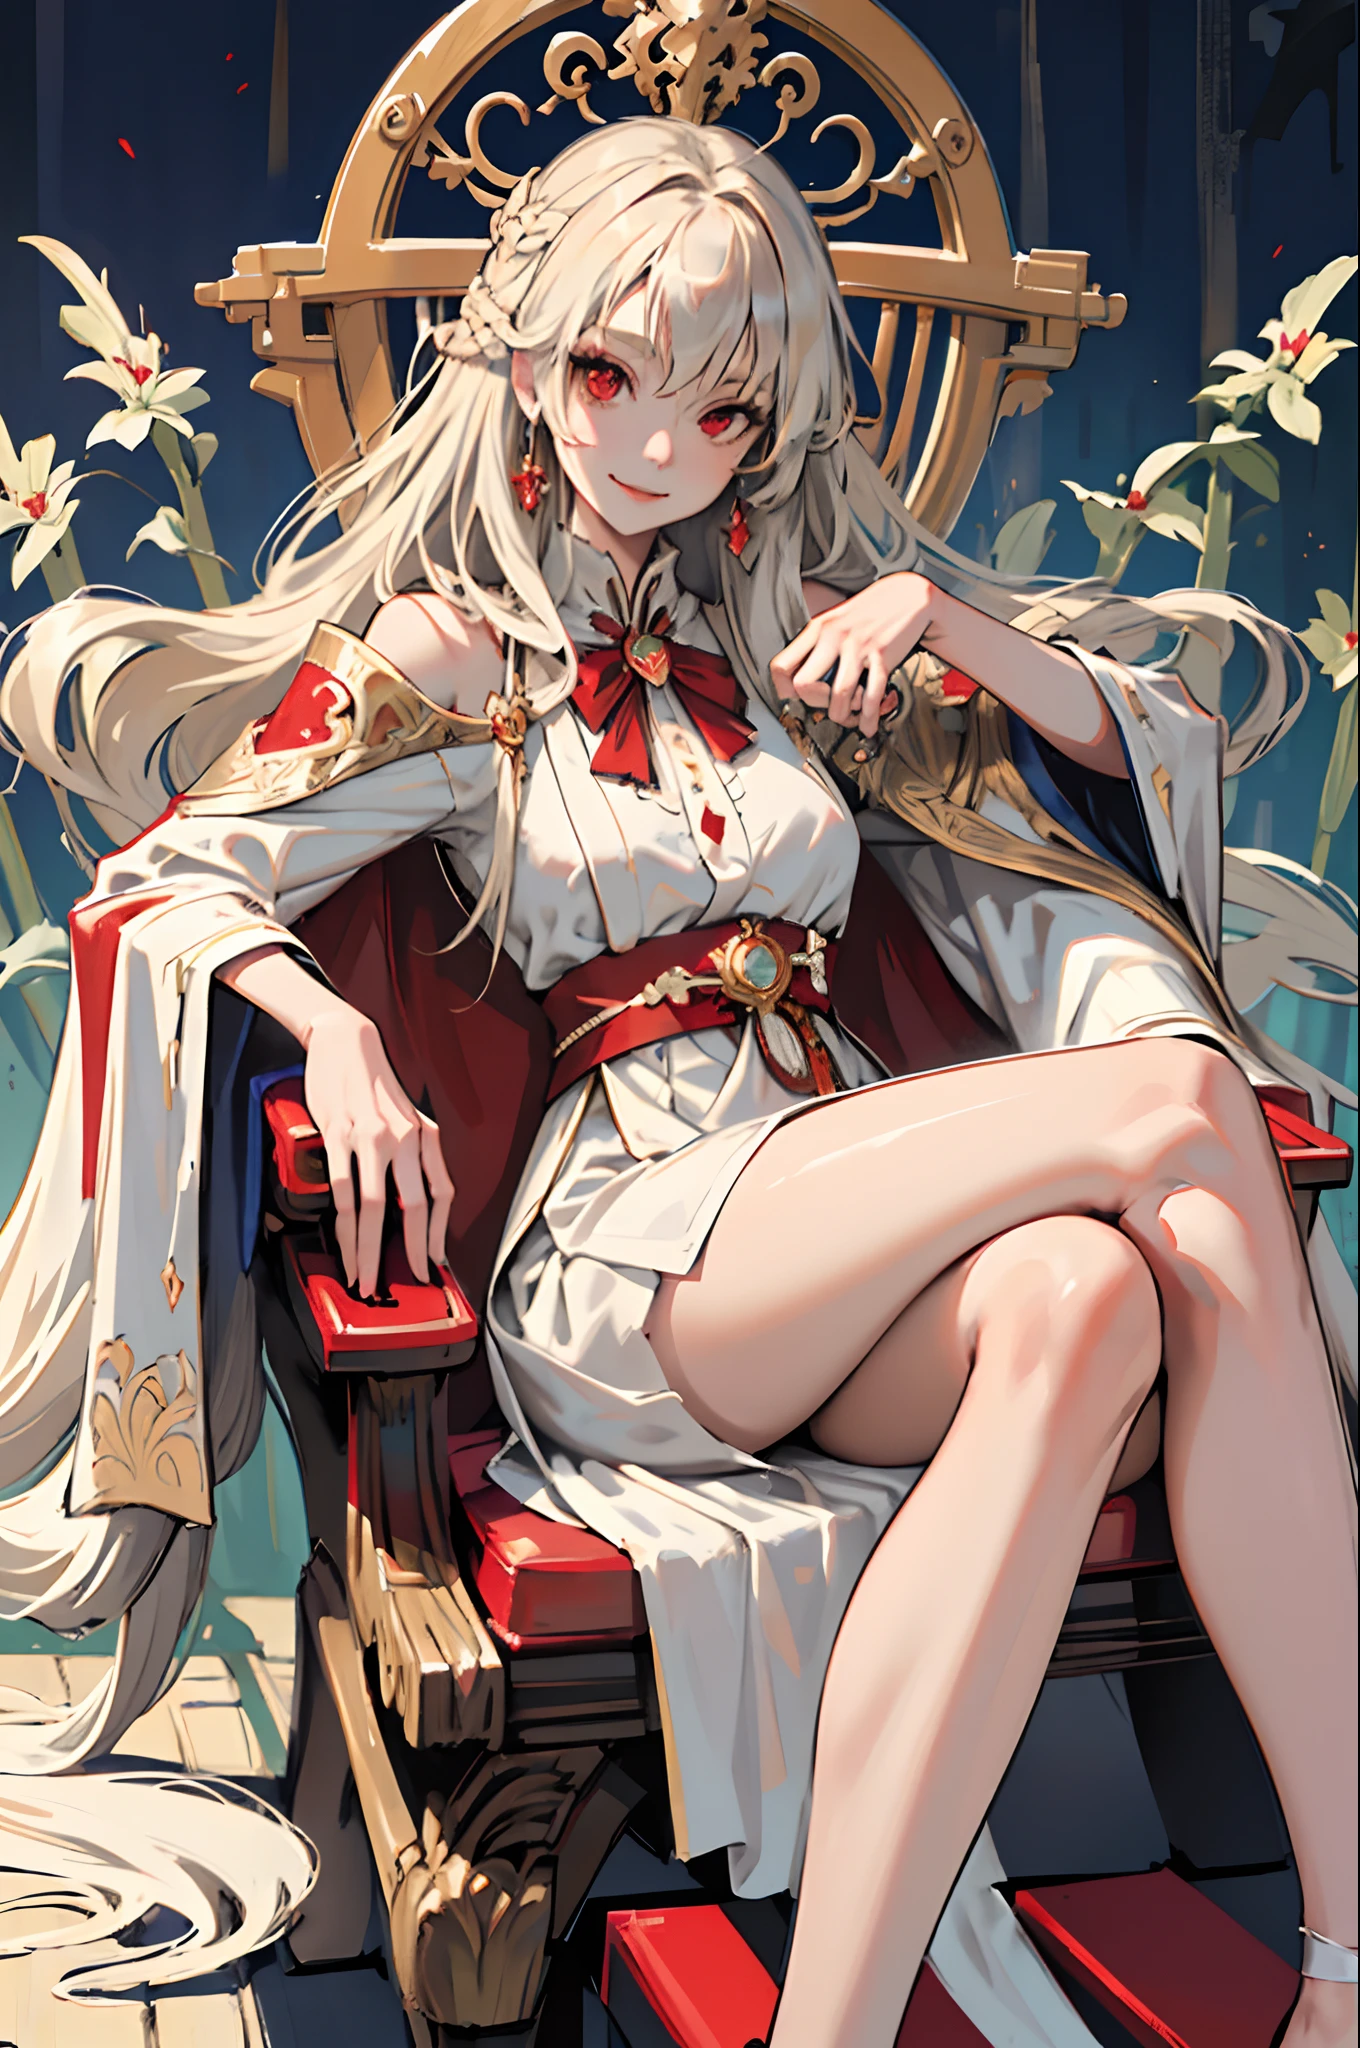 (masutepiece, Best Quality),  1girl in, Solo, (Her Majesty:1.15), platinum-blonde, Long hair, (red cape), drapes, White Dress, queen dress, Aurora, (Sunshine, skyporn, River, forest), deadpan, Red Eyes, Very long hair, (Art Nouveau:1.2), Alphonse Mucha, tiarra, (Face Focus, Upper body), sit, (red throne:1.12), tiarra, cross one's legs, highly intricate detail, Realistic light, Smile